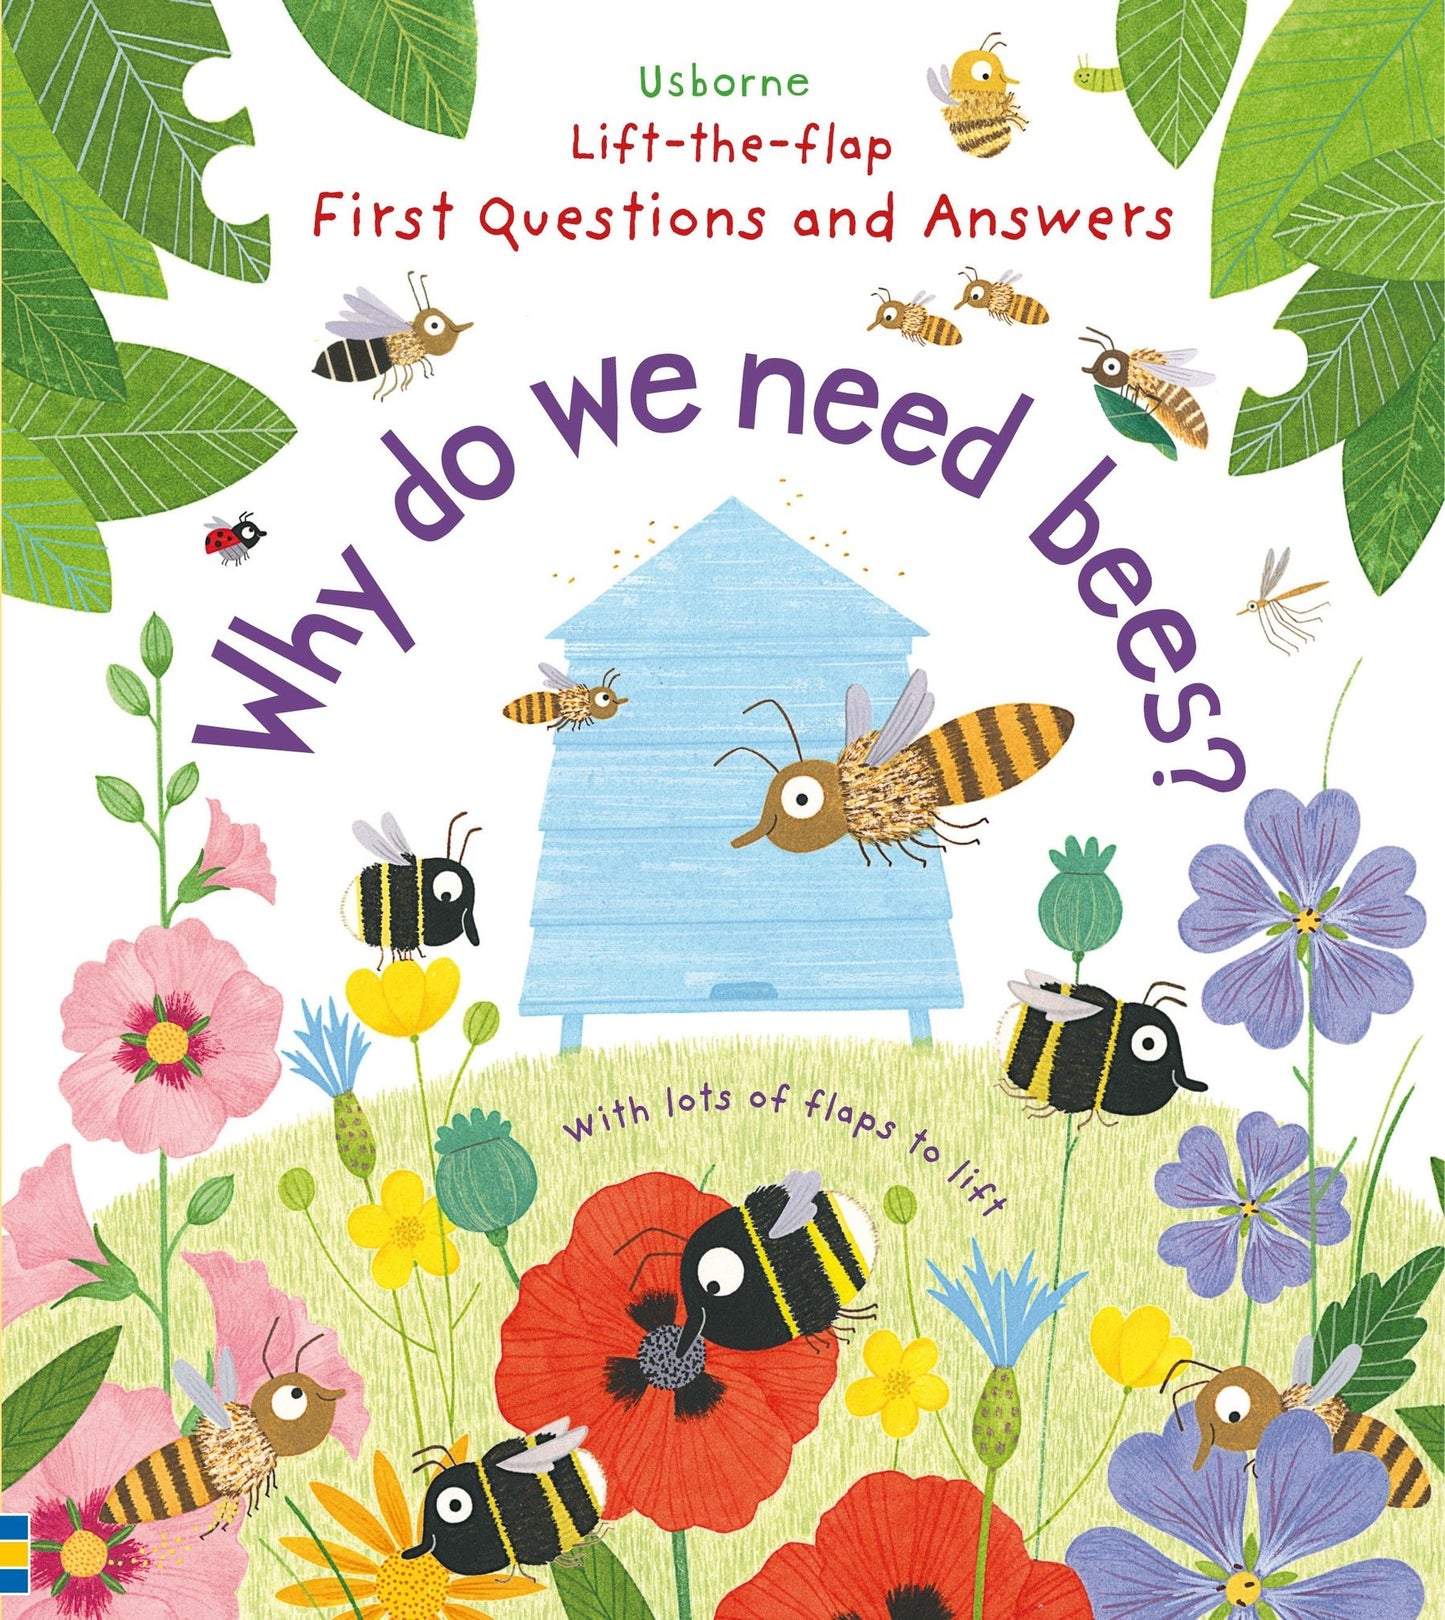 Lift-the-flap First Questions and Answers: Why do we need bees?